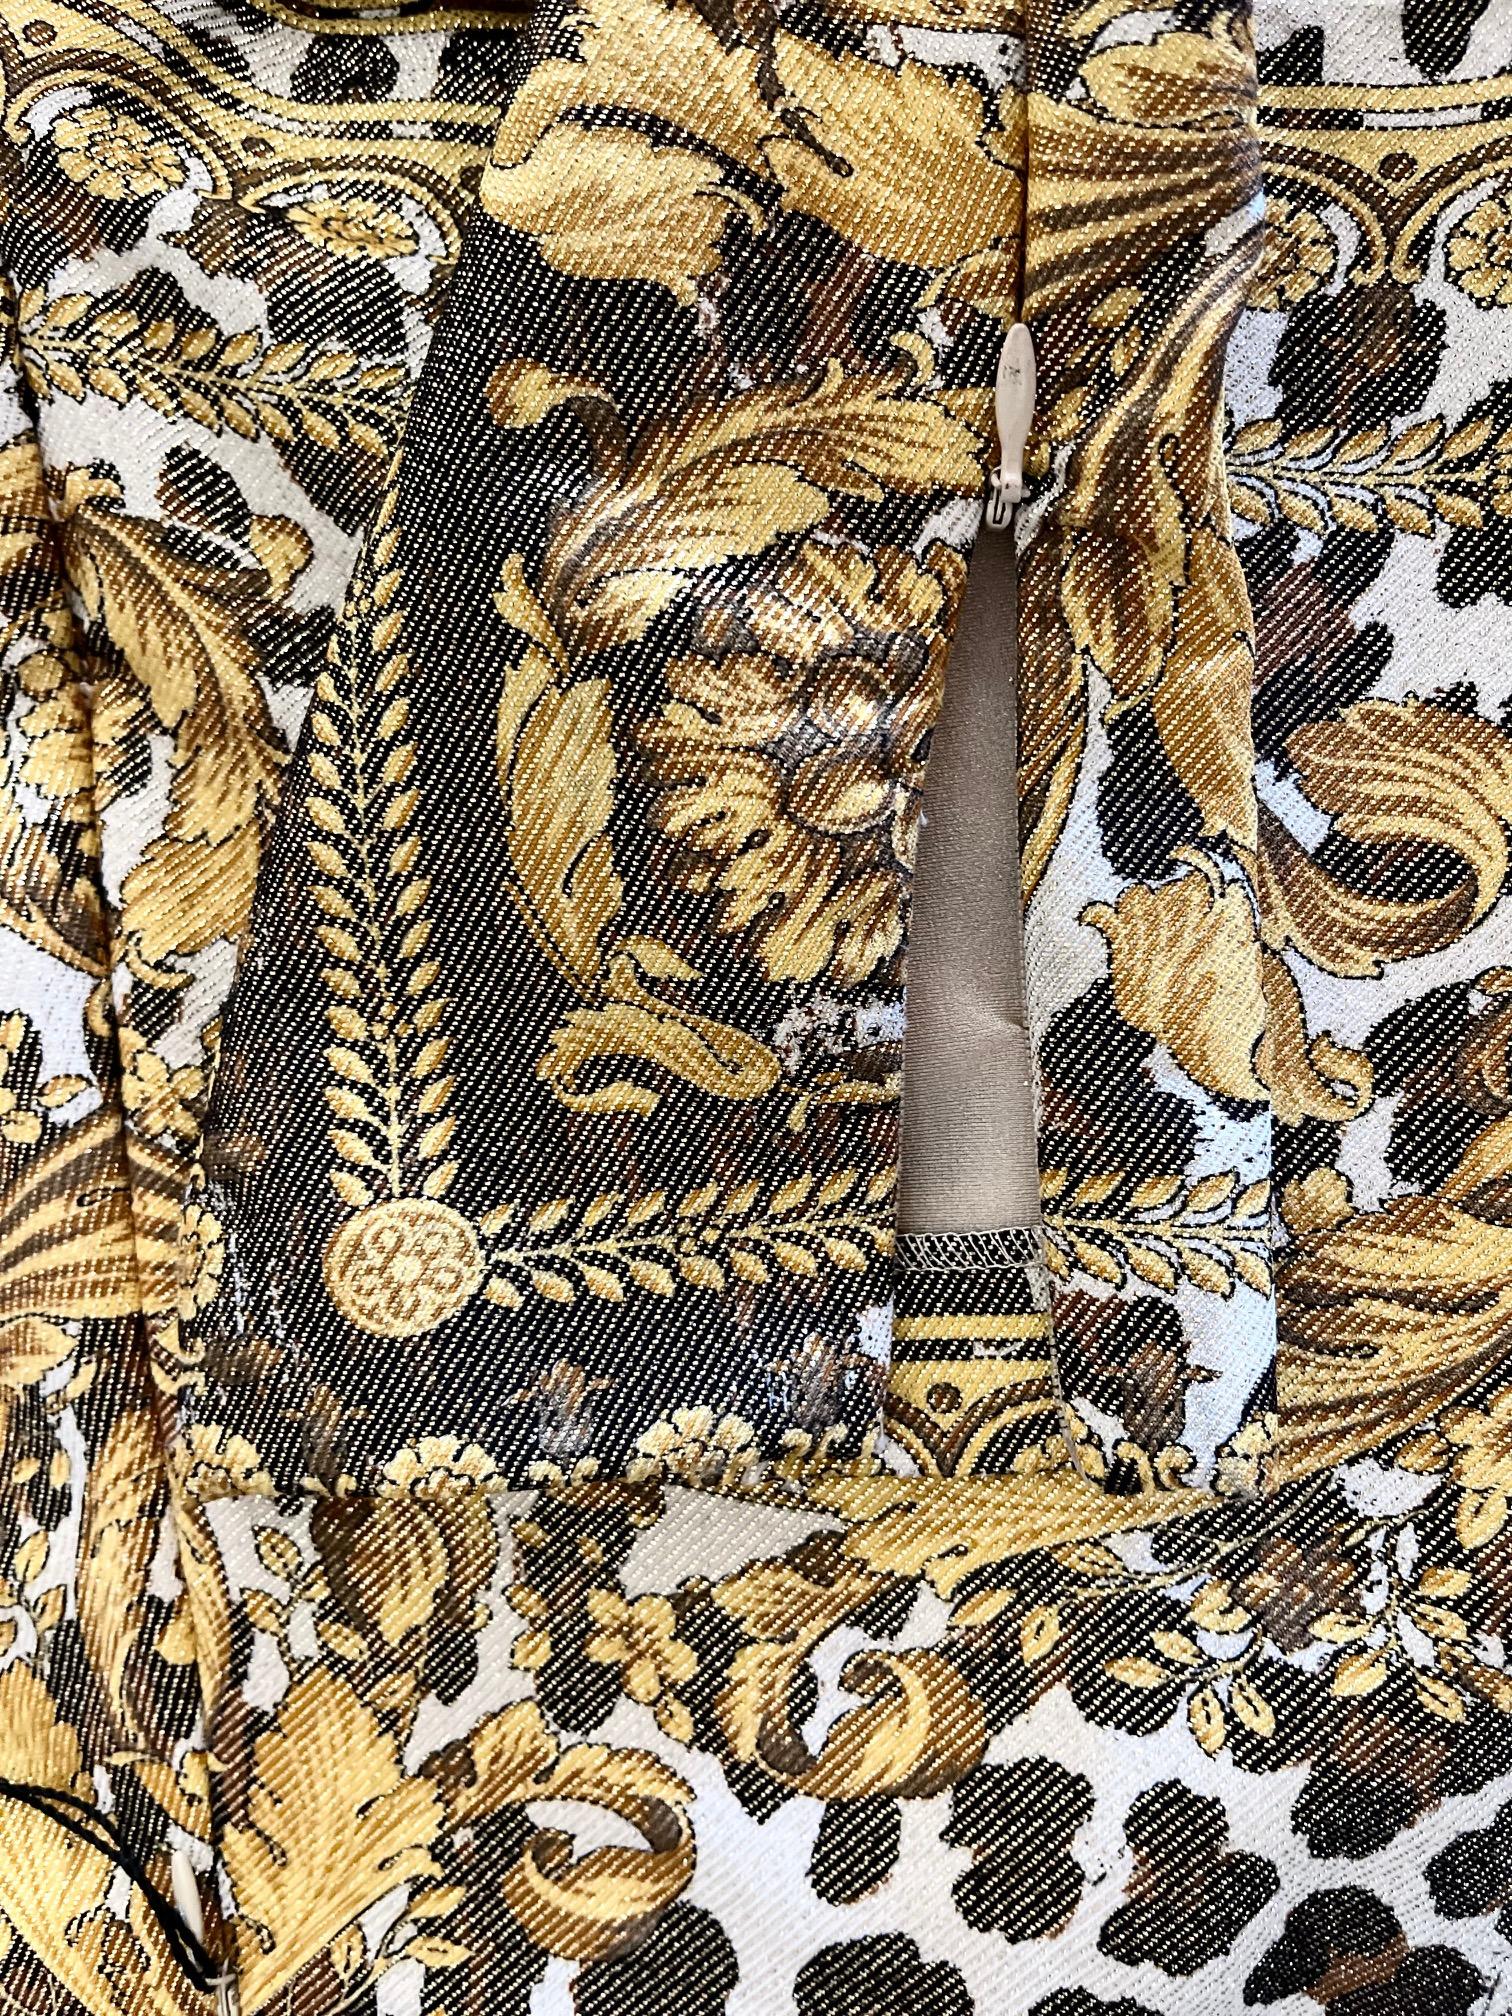 ANIMAL BAROQUE LEGGINGS from MIAMI MANSION GIANNI VERSACE PERSONAL COLLECTION In New Condition For Sale In Montgomery, TX